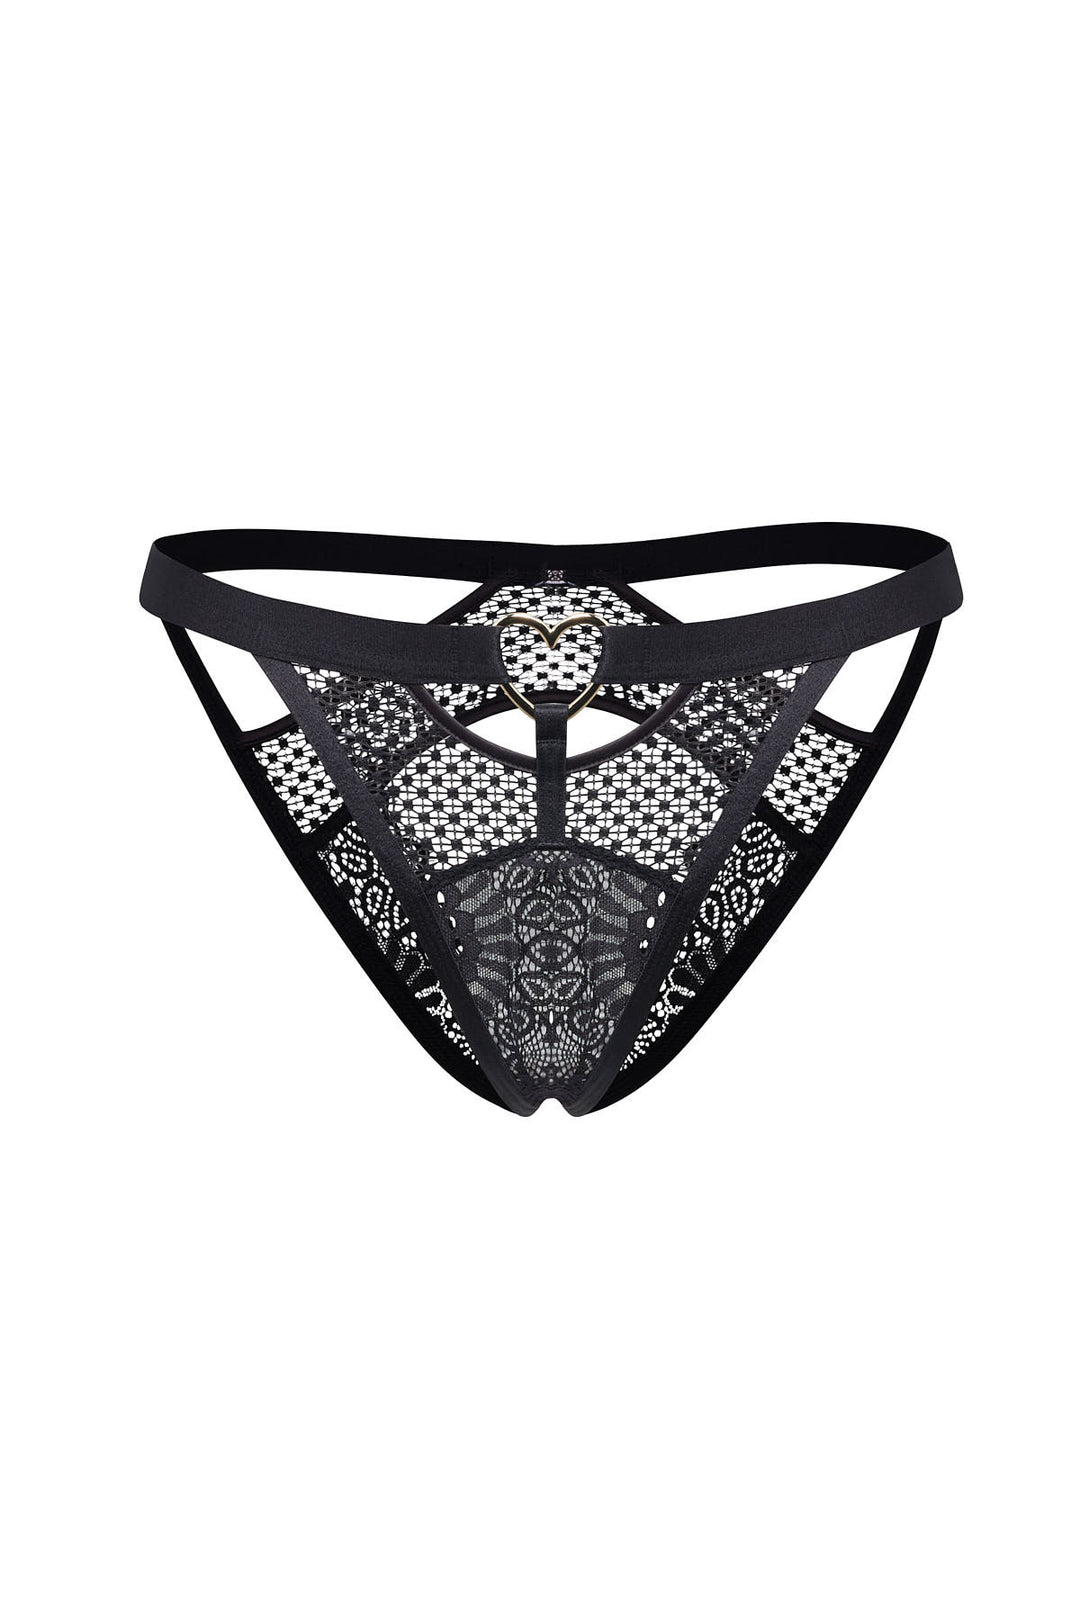 Amour Mesh Ouvert Panty